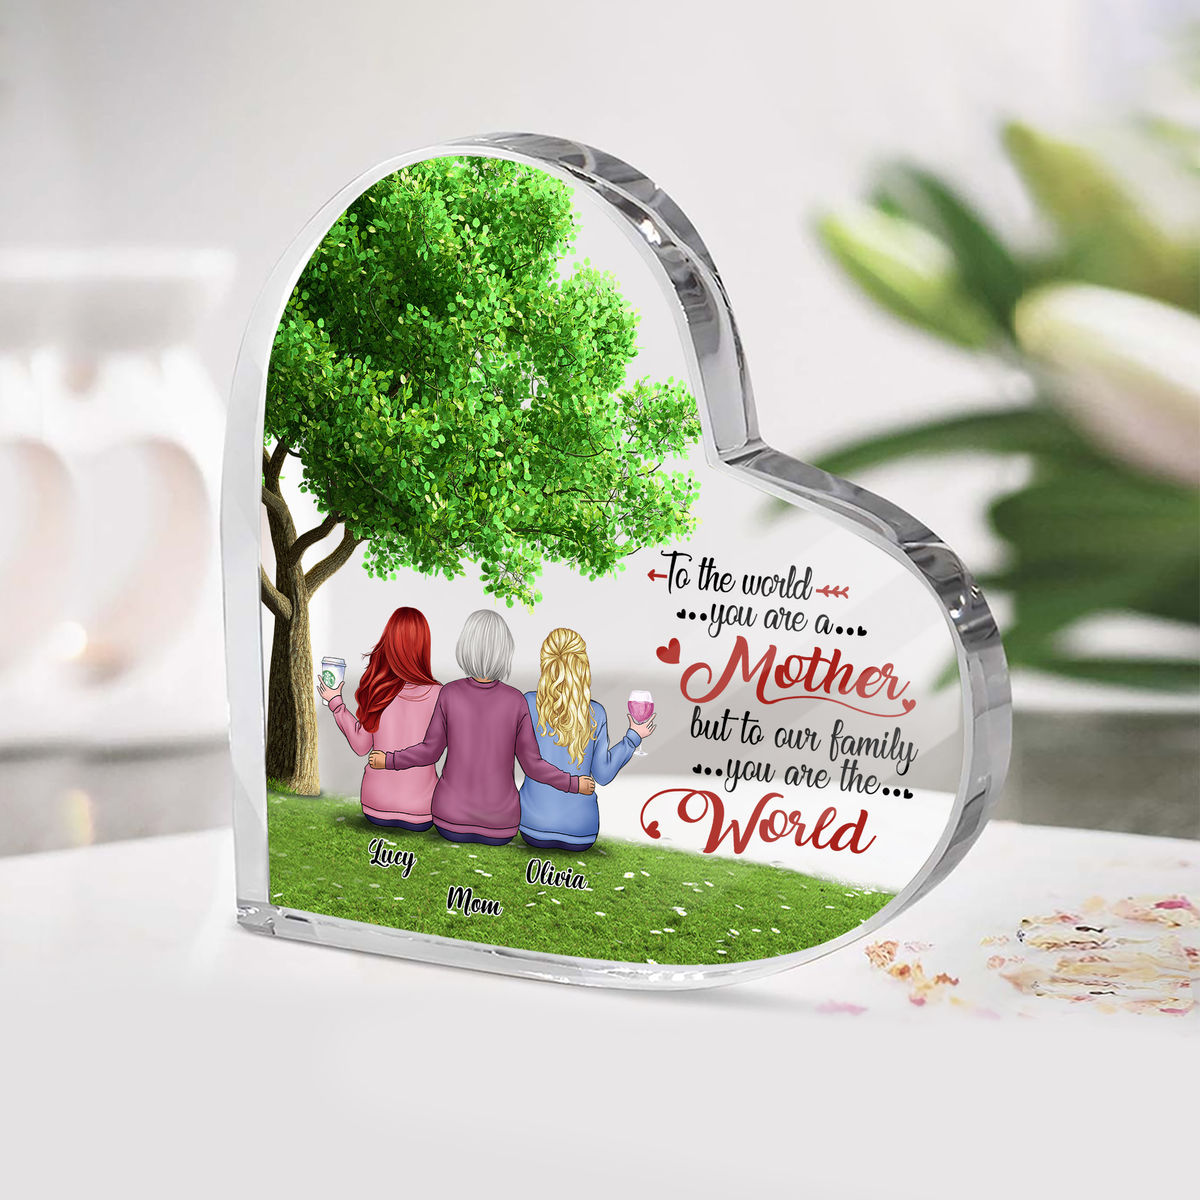 Personalized Desktop - Semitest - Transparent Plaque - To the world you are a mother but to our family you are the world (Custom Heart - Shaped Acrylic Plaque)_1